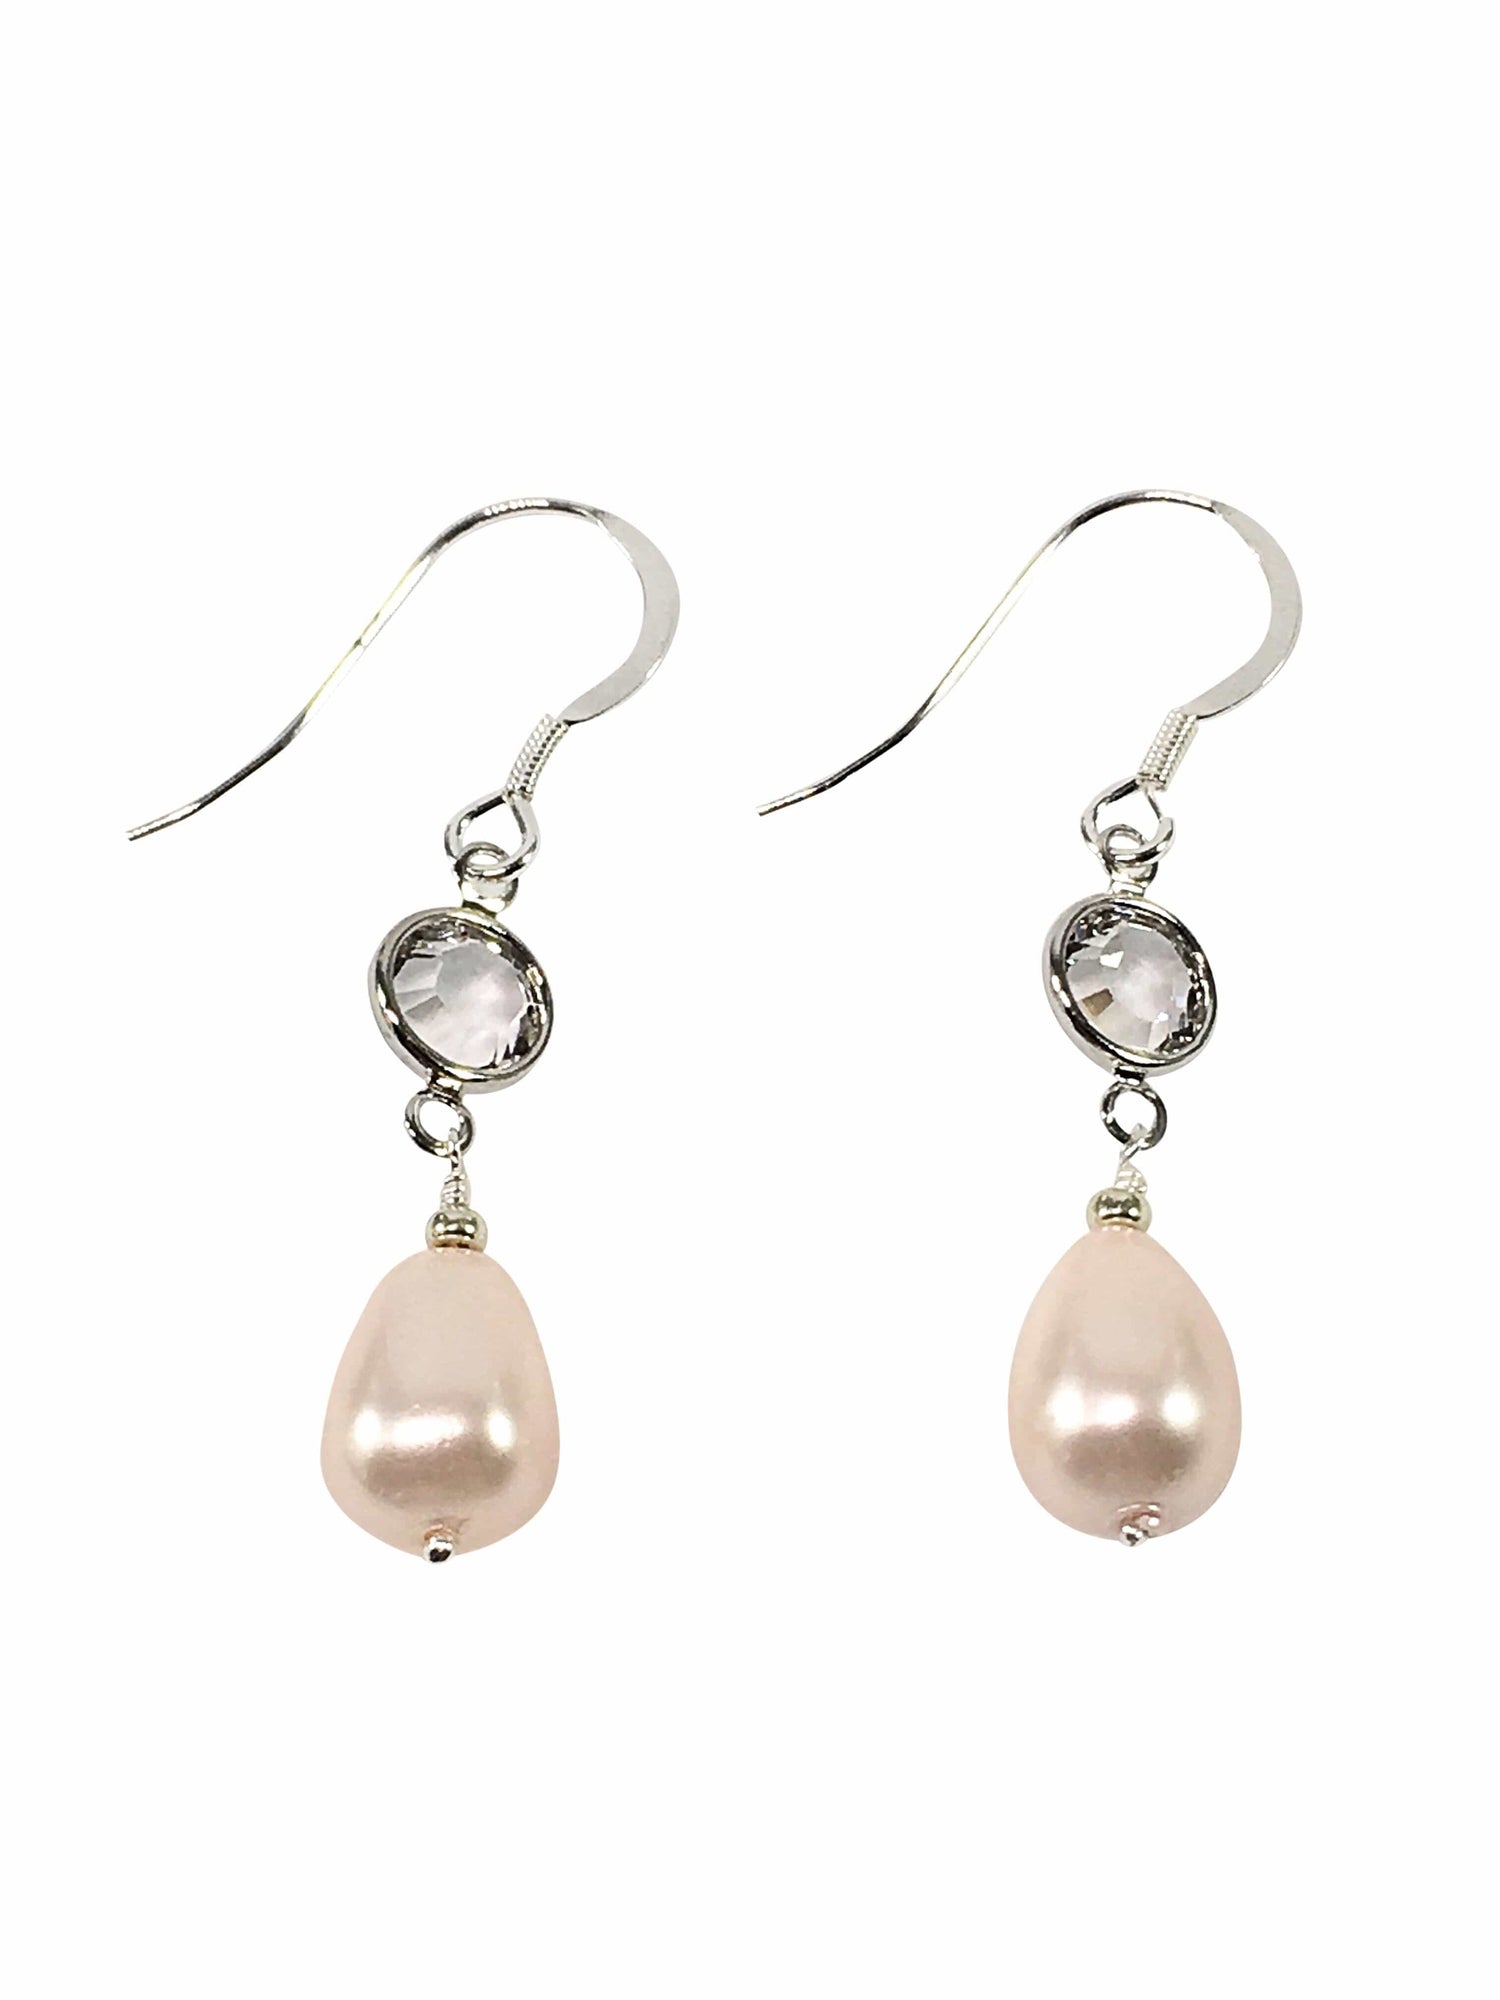 Handmade Sterling Silver Earrings With Pearl And Swarovski Elements